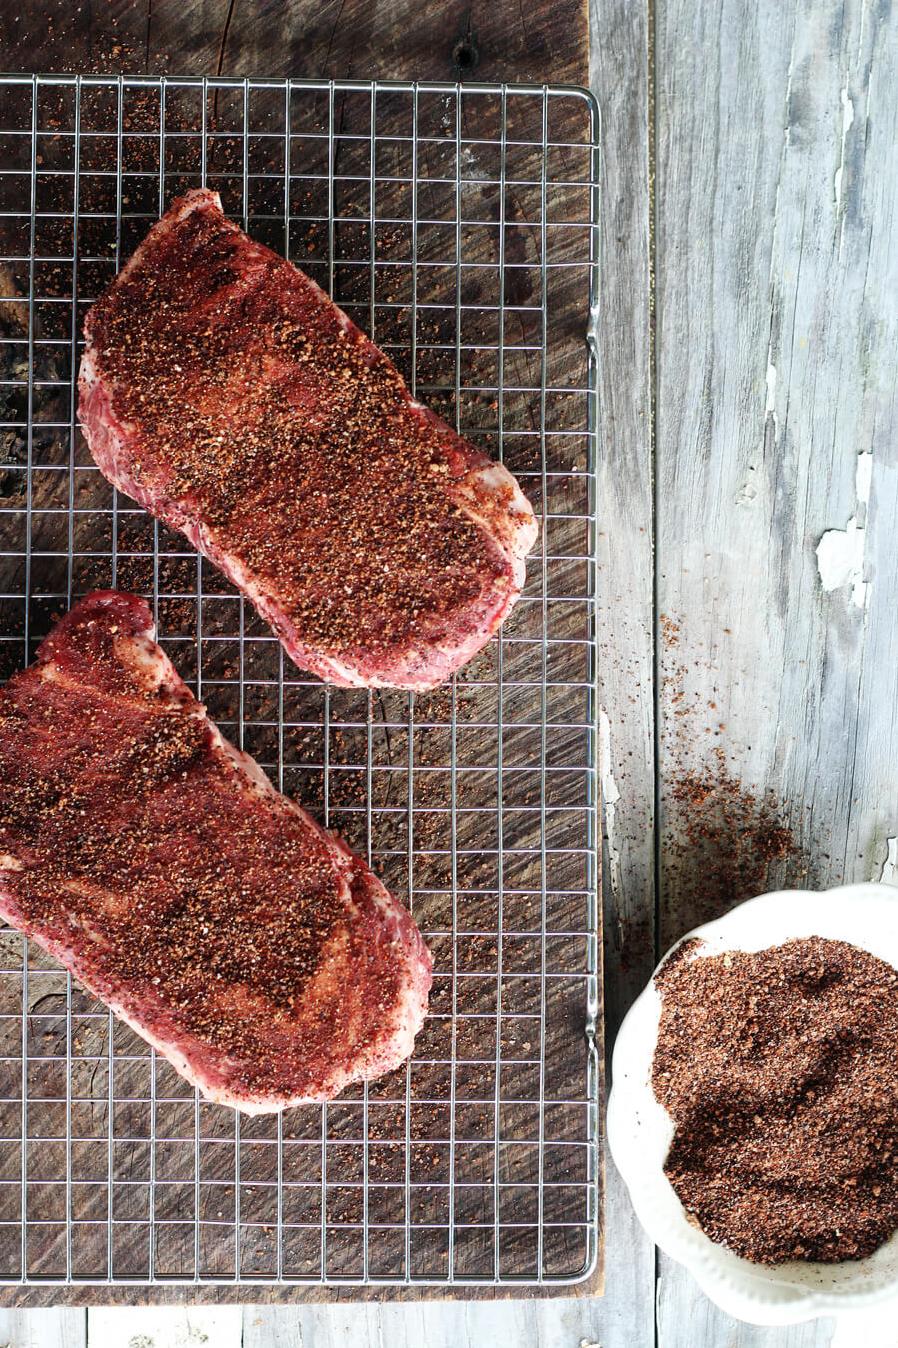  Spices and coffee come together to make the perfect balance of flavors for your meat.